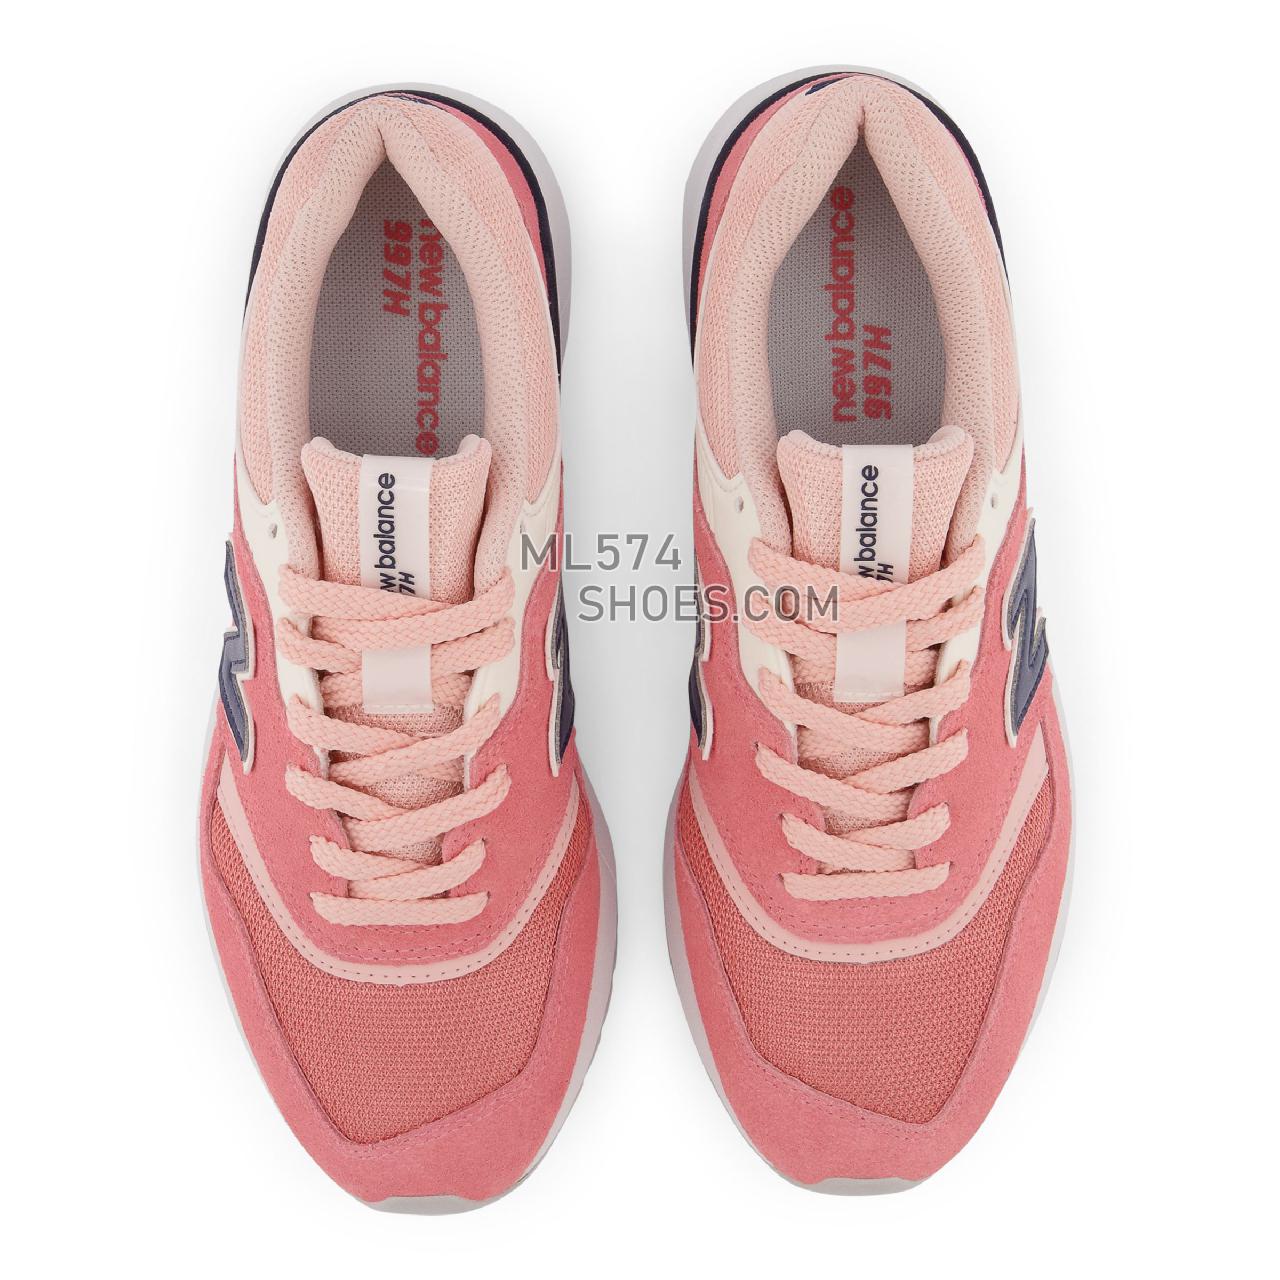 New Balance 997H - Women's Sport Style Sneakers - Pink Haze with White - CW997HSP